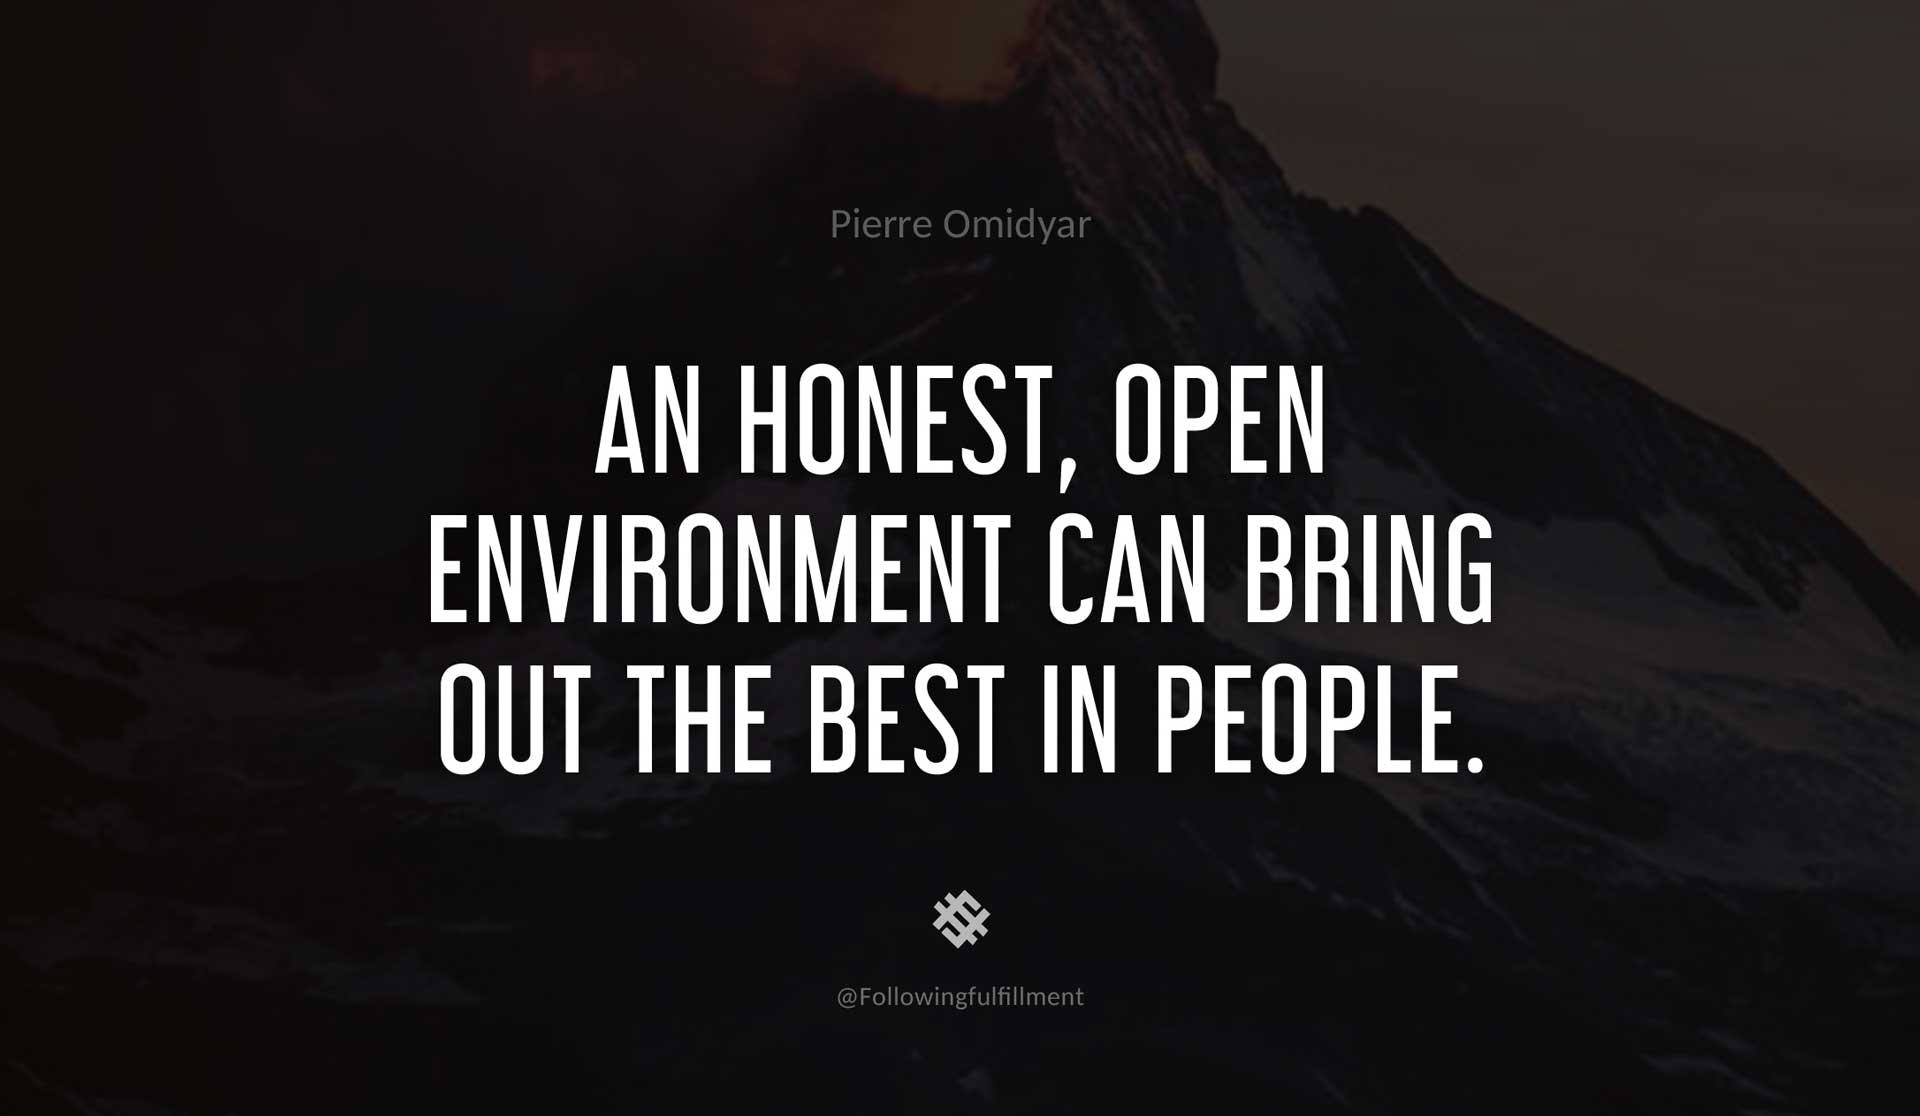 An-honest,-open-environment-can-bring-out-the-best-in-people.-PIERRE-OMIDYAR-Quote.jpg